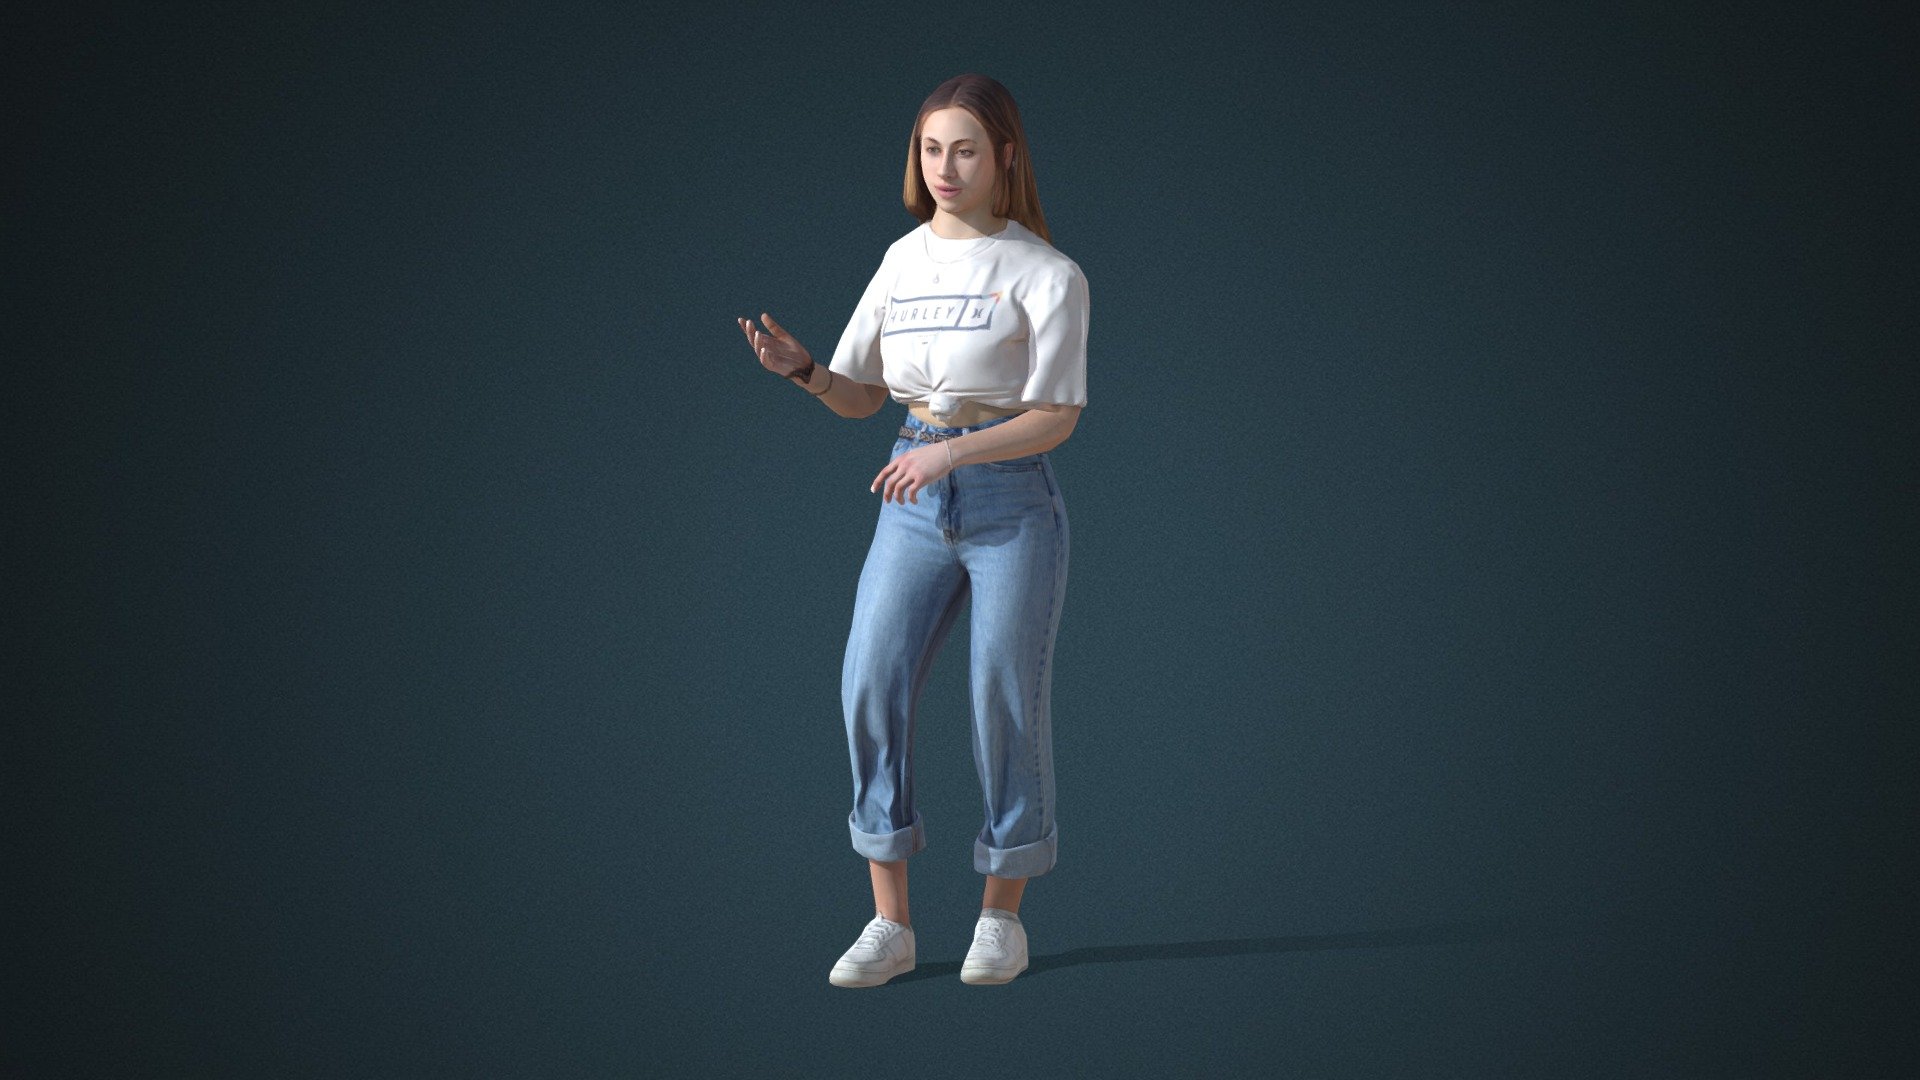 Do you like this model?  Free Download more models, motions and auto rigging tool AccuRIG (Value: $150+) on ActorCore
 

This model includes 2 mocap animations:  Modern_F_Talk,Modern_F_Walk. Get more free motions

Design for high-performance crowd animation.

Buy full pack and Save 20%+: Young Fashion Vol.4


SPECIFICATIONS

✔ Geometry : 7K~10K Quads, one mesh

✔ Material : One material with changeable colors.

✔ Texture Resolution : 4K

✔ Shader : PBR, Diffuse, Normal, Roughness, Metallic, Opacity

✔ Rigged : Facial and Body (shoulders, fingers, toes, eyeballs, jaw)

✔ Blendshape : 122 for facial expressions and lipsync

✔ Compatible with iClone AccuLips, Facial ExPlus, and traditional lip-sync.


About Reallusion ActorCore

ActorCore offers the highest quality 3D asset libraries for mocap motions and animated 3D humans for crowd rendering 3d model